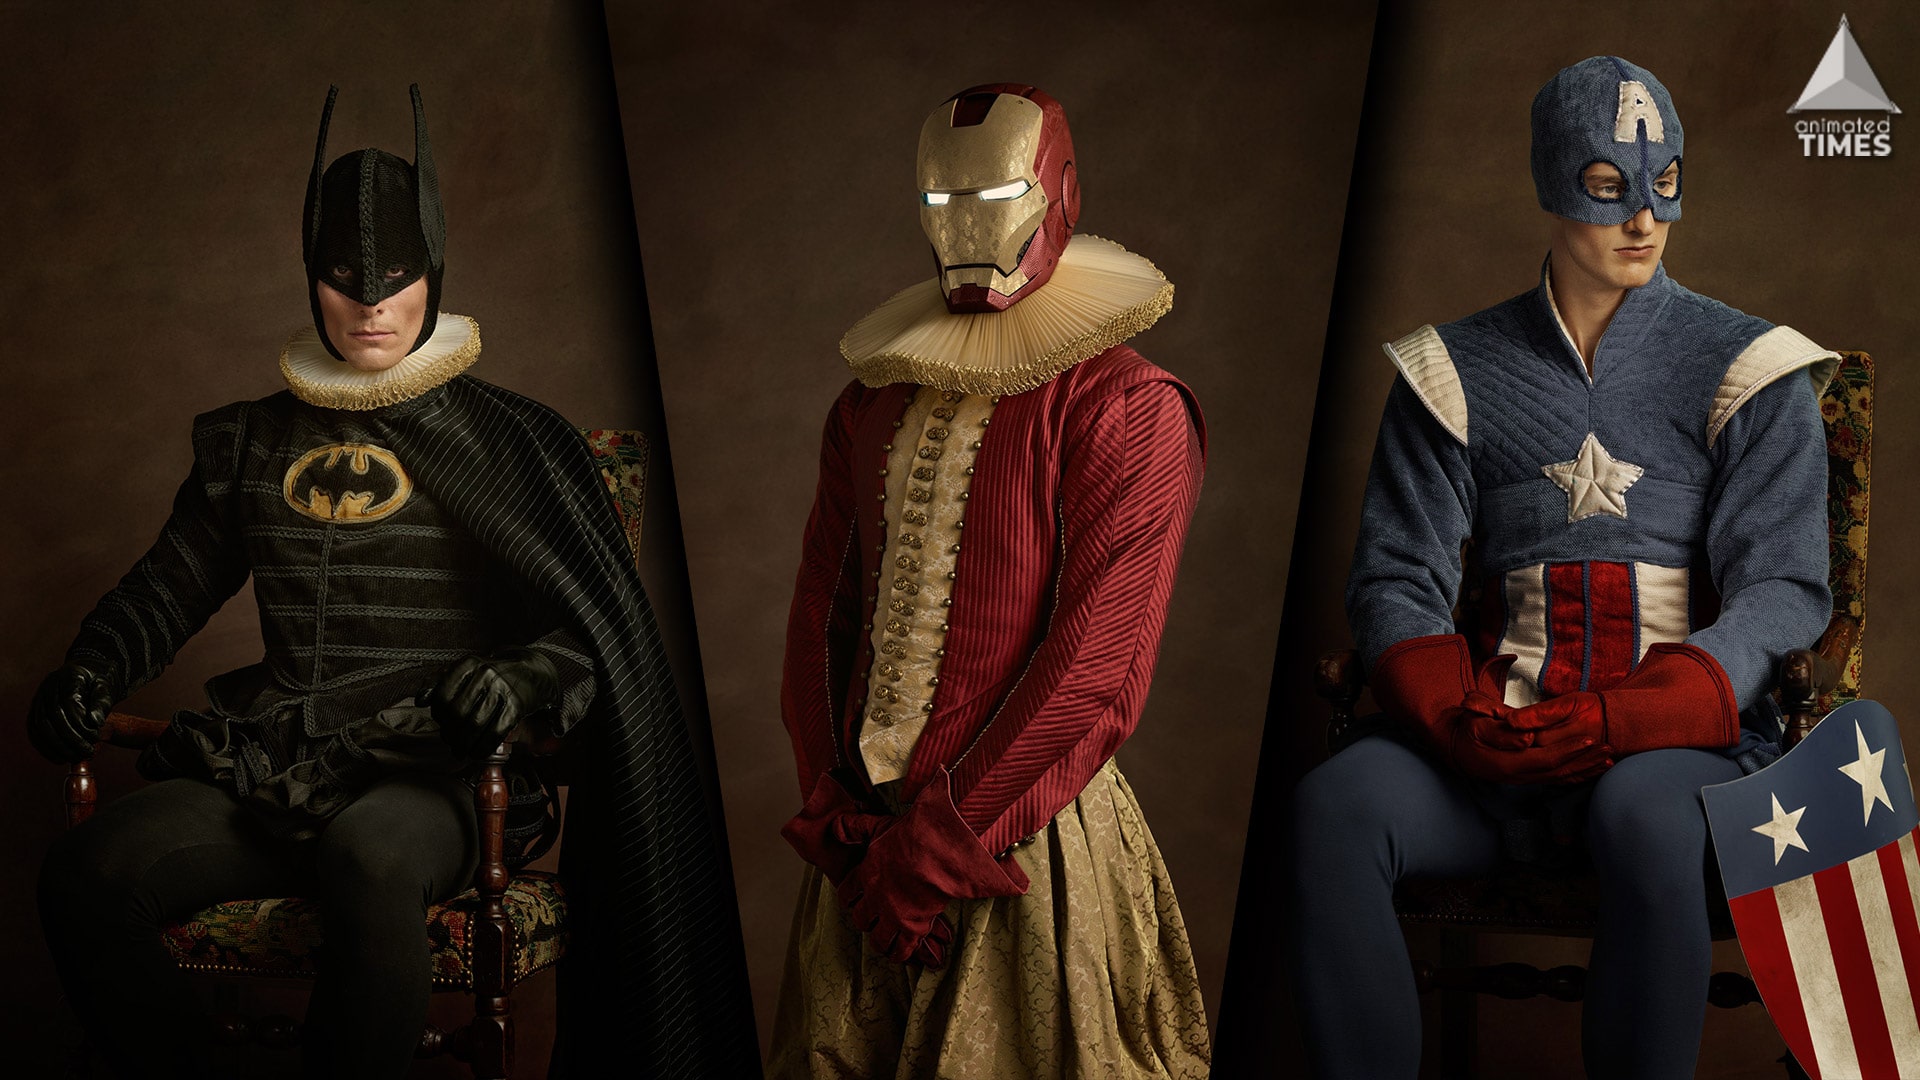 Comic Book Characters Reimagined in 16th Century Portraits